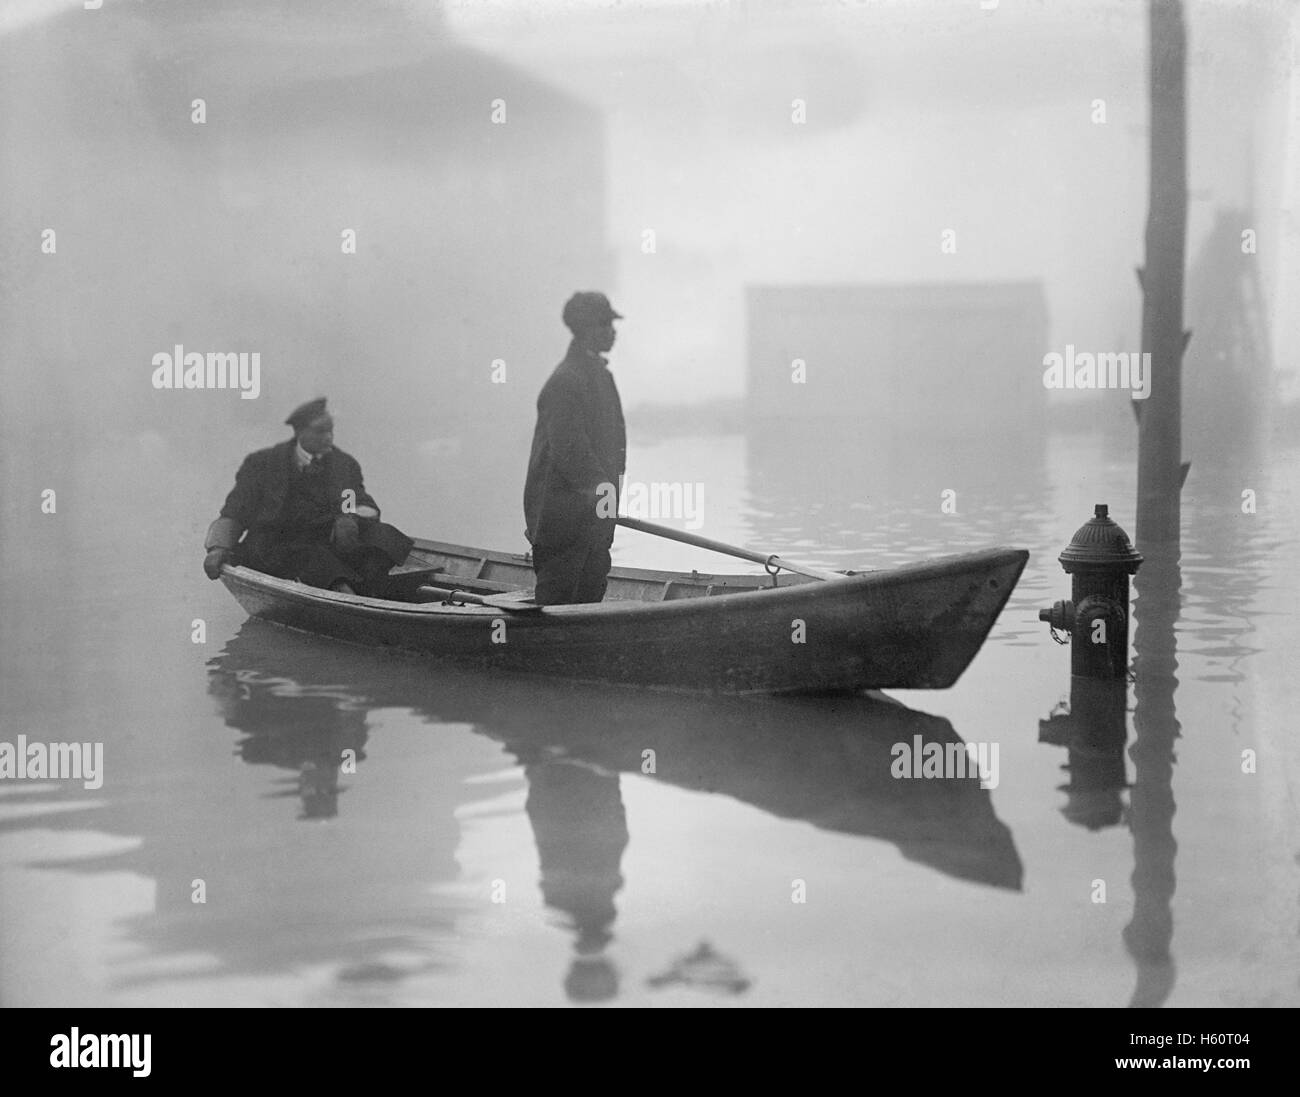 Two Men in Boat after Potomac River Flood, Georgetown, Washington DC, USA, National Photo Company, February 1918 Stock Photo